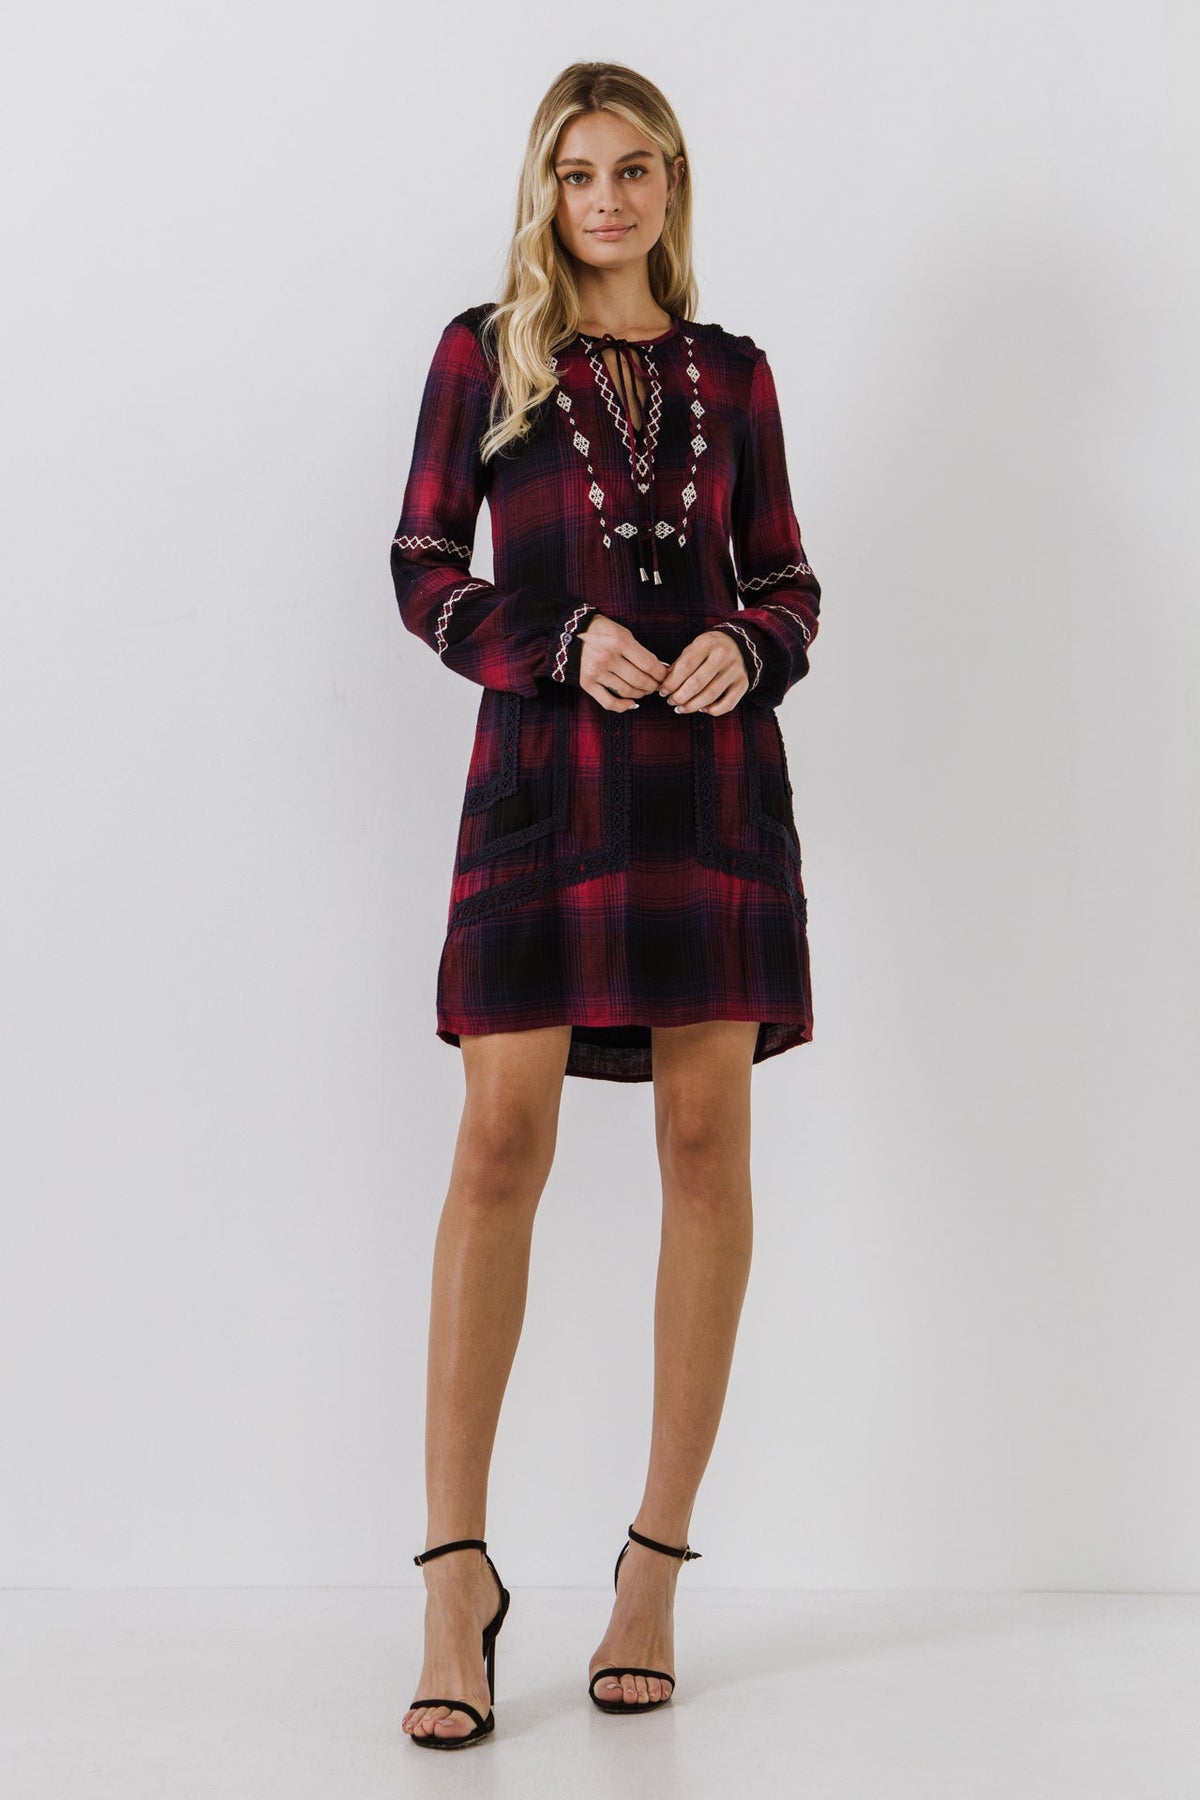 ENGLISH FACTORY - Dark Navy Plaid Dress - DRESSES available at Objectrare